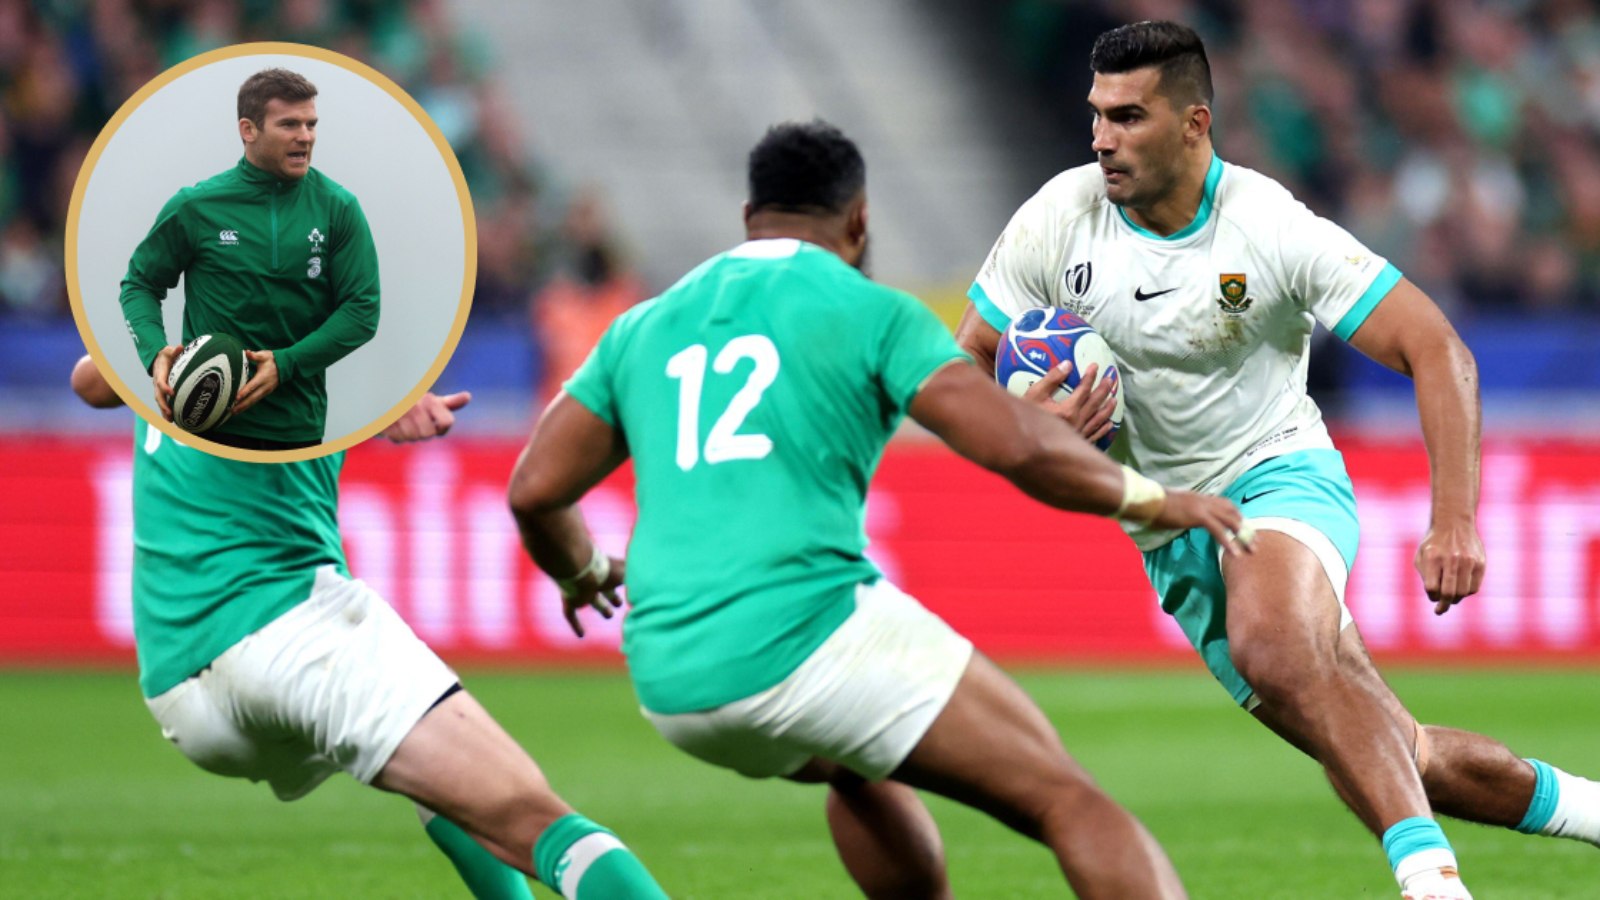 gordon d’arcy reveals primary concern for ireland ahead of highly-anticipated springboks series that ‘won’t disappoint’